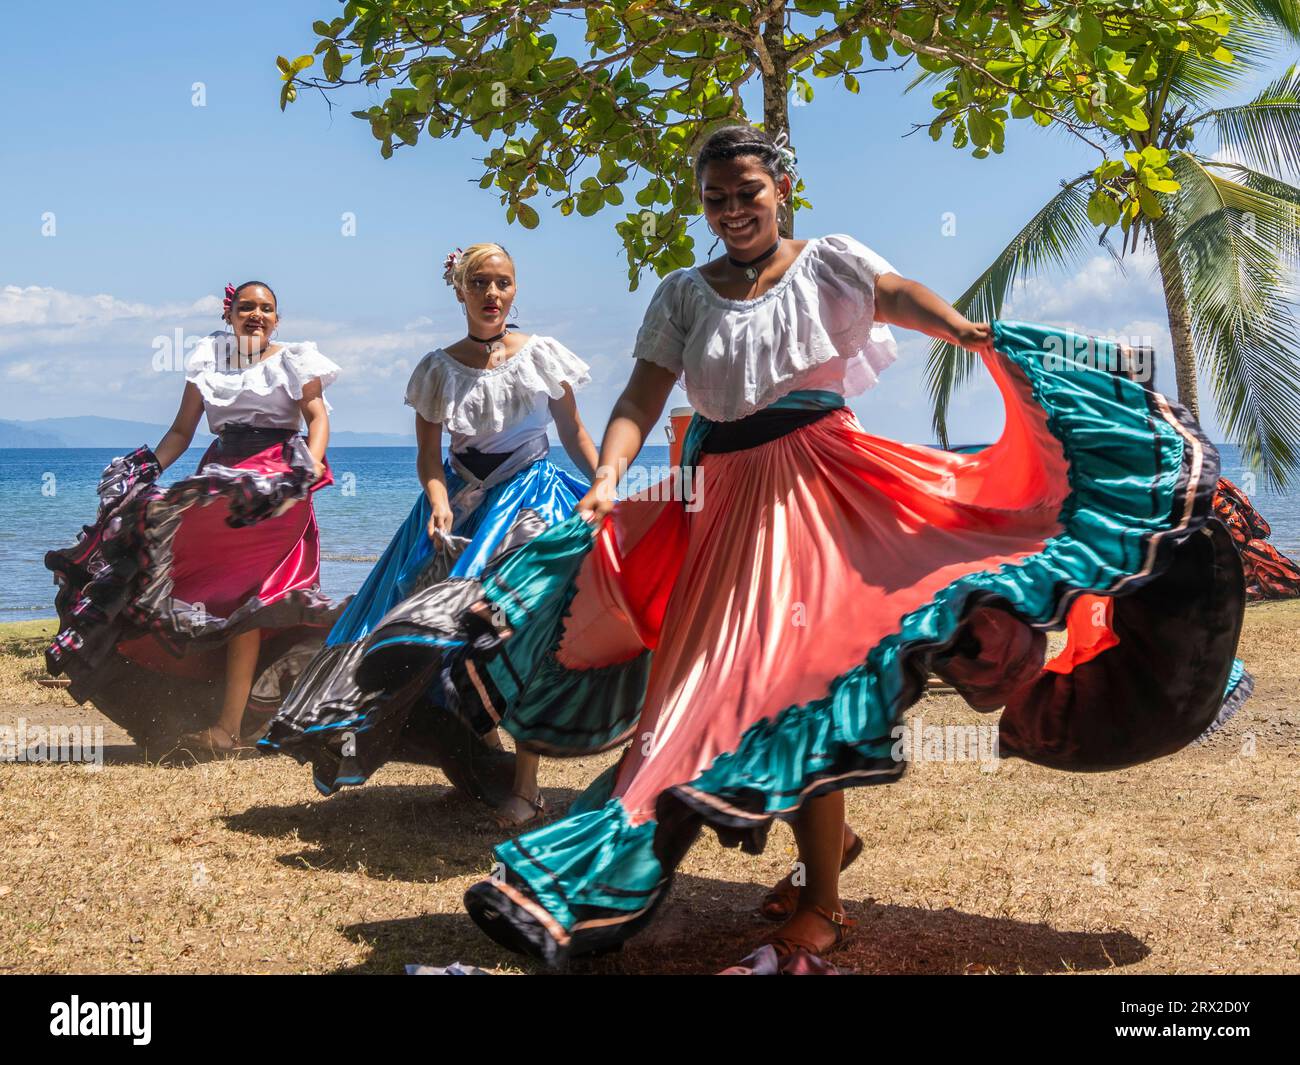 A group of young Costa Rican dancers in traditional dress perform at Playa Blanca, El Golfito, Costa Rica, Central America Stock Photo